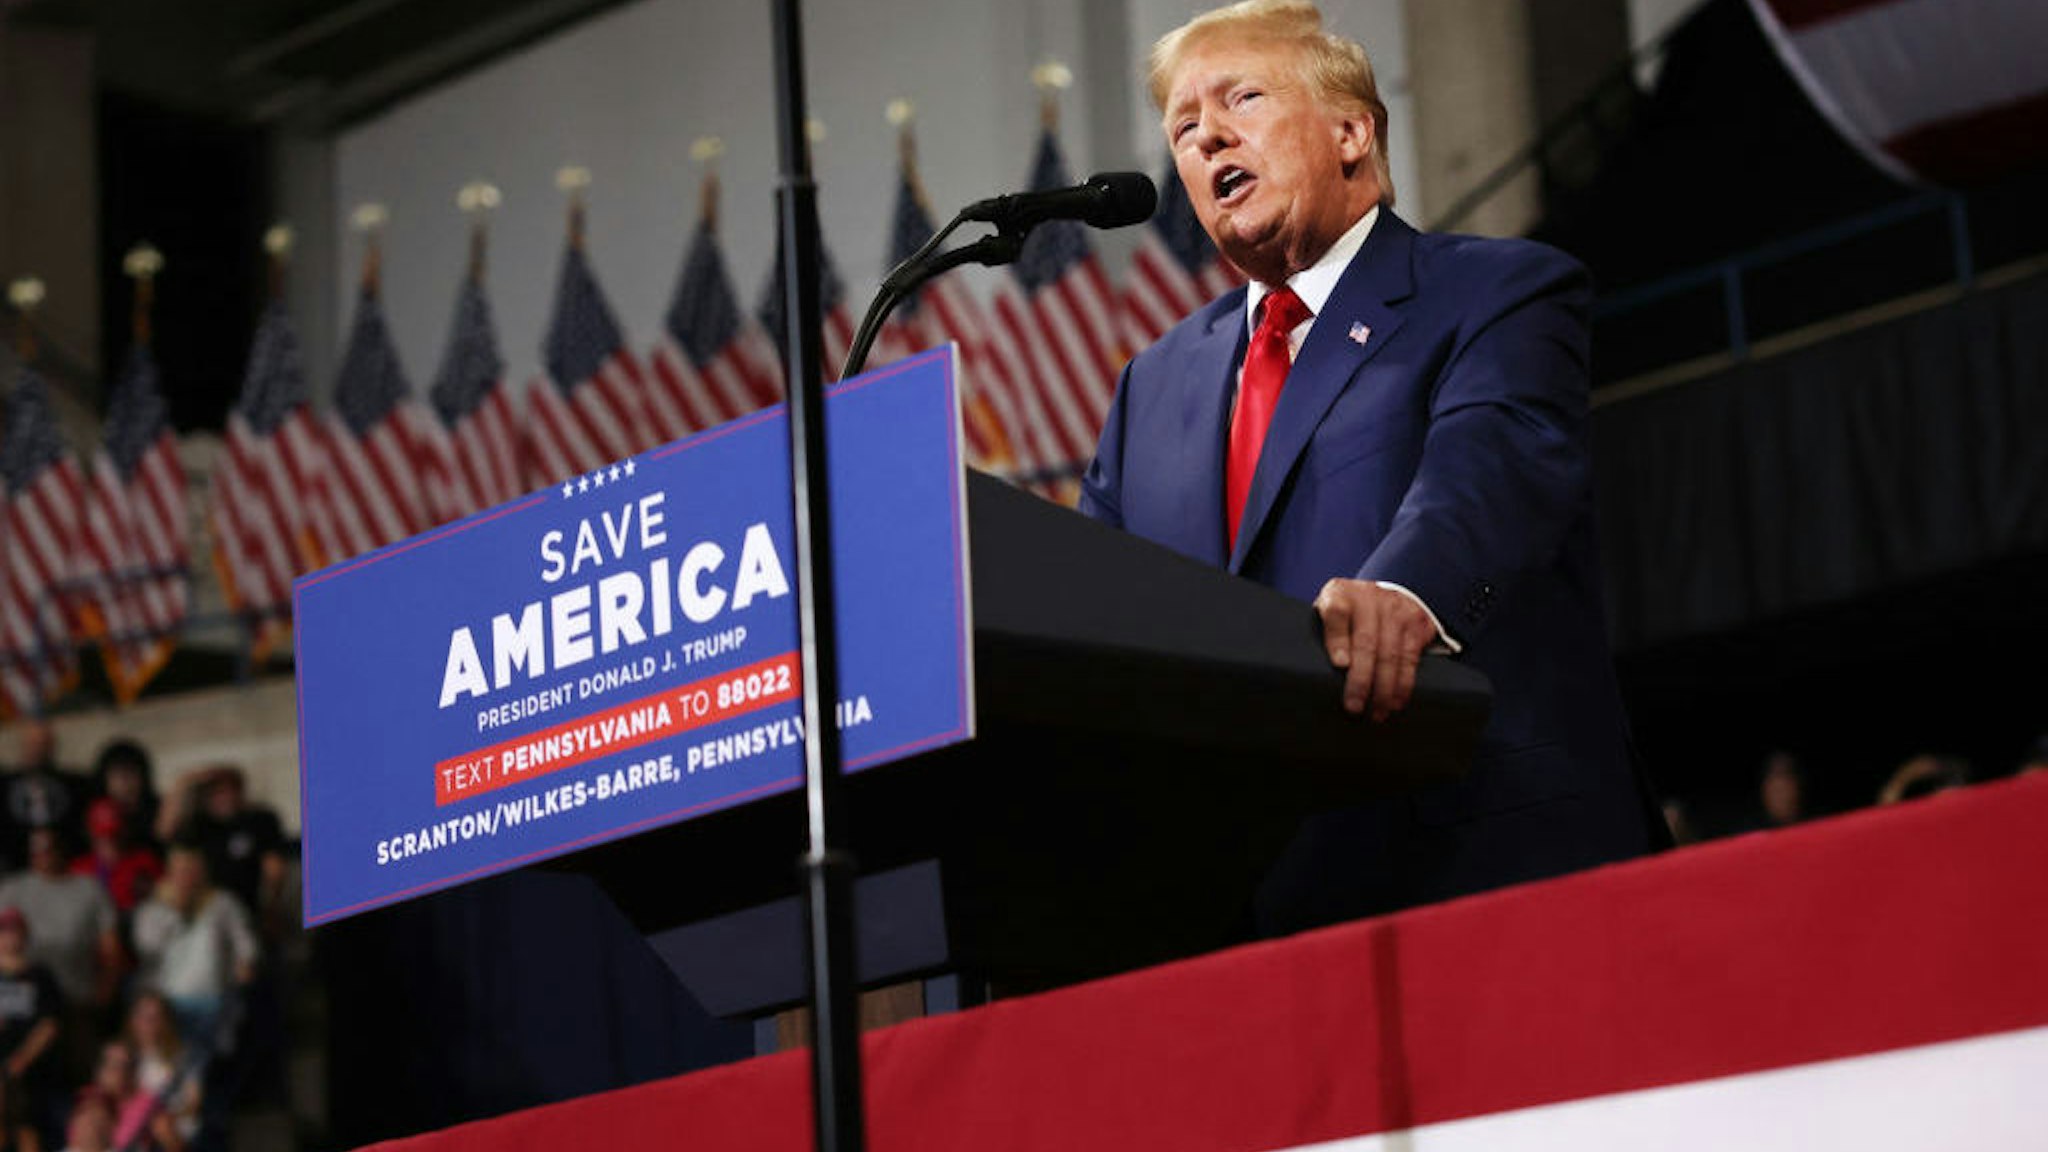 WILKES-BARRE, PENNSYLVANIA - SEPTEMBER 03: Former president Donald Trump speaks to supporters at a rally to support local candidates on September 03, 2022 in Wilkes-Barre, Pennsylvania. Trump still denies that he lost the election against President Joe Biden and has encouraged his supporters to doubt the election process. Trump has backed Senate candidate Mehmet Oz and gubernatorial hopeful Doug Mastriano. (Photo by Spencer Platt/Getty Images)